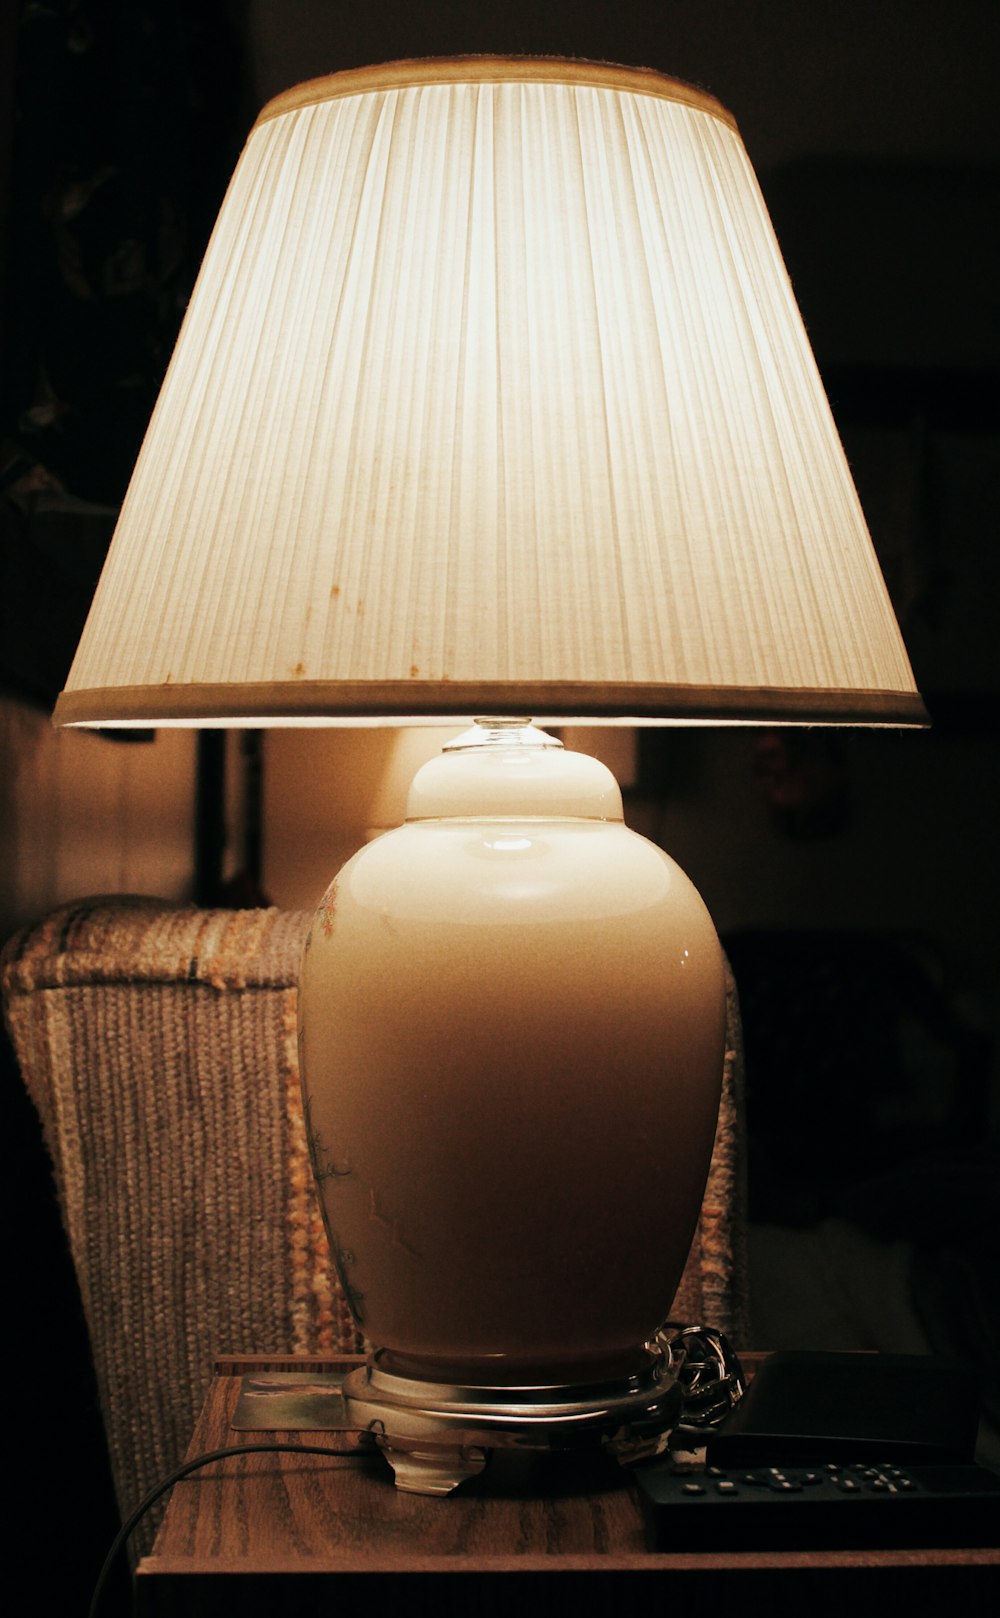 table lamp turned on